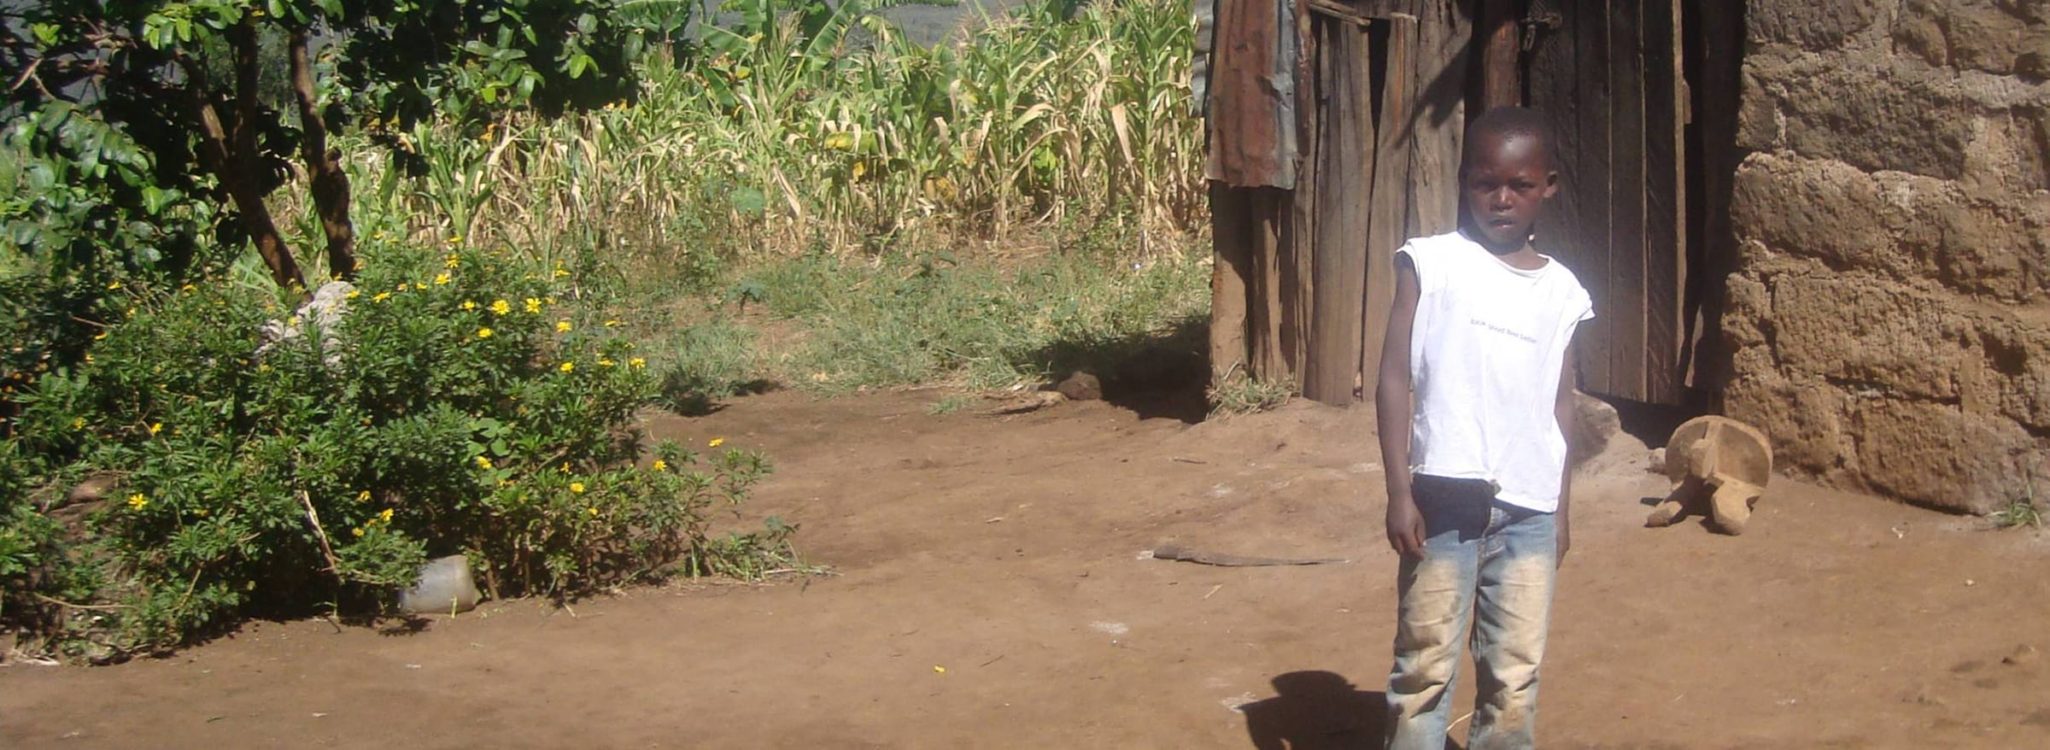 Kenyan child in white t-shirt standing outside a rural building